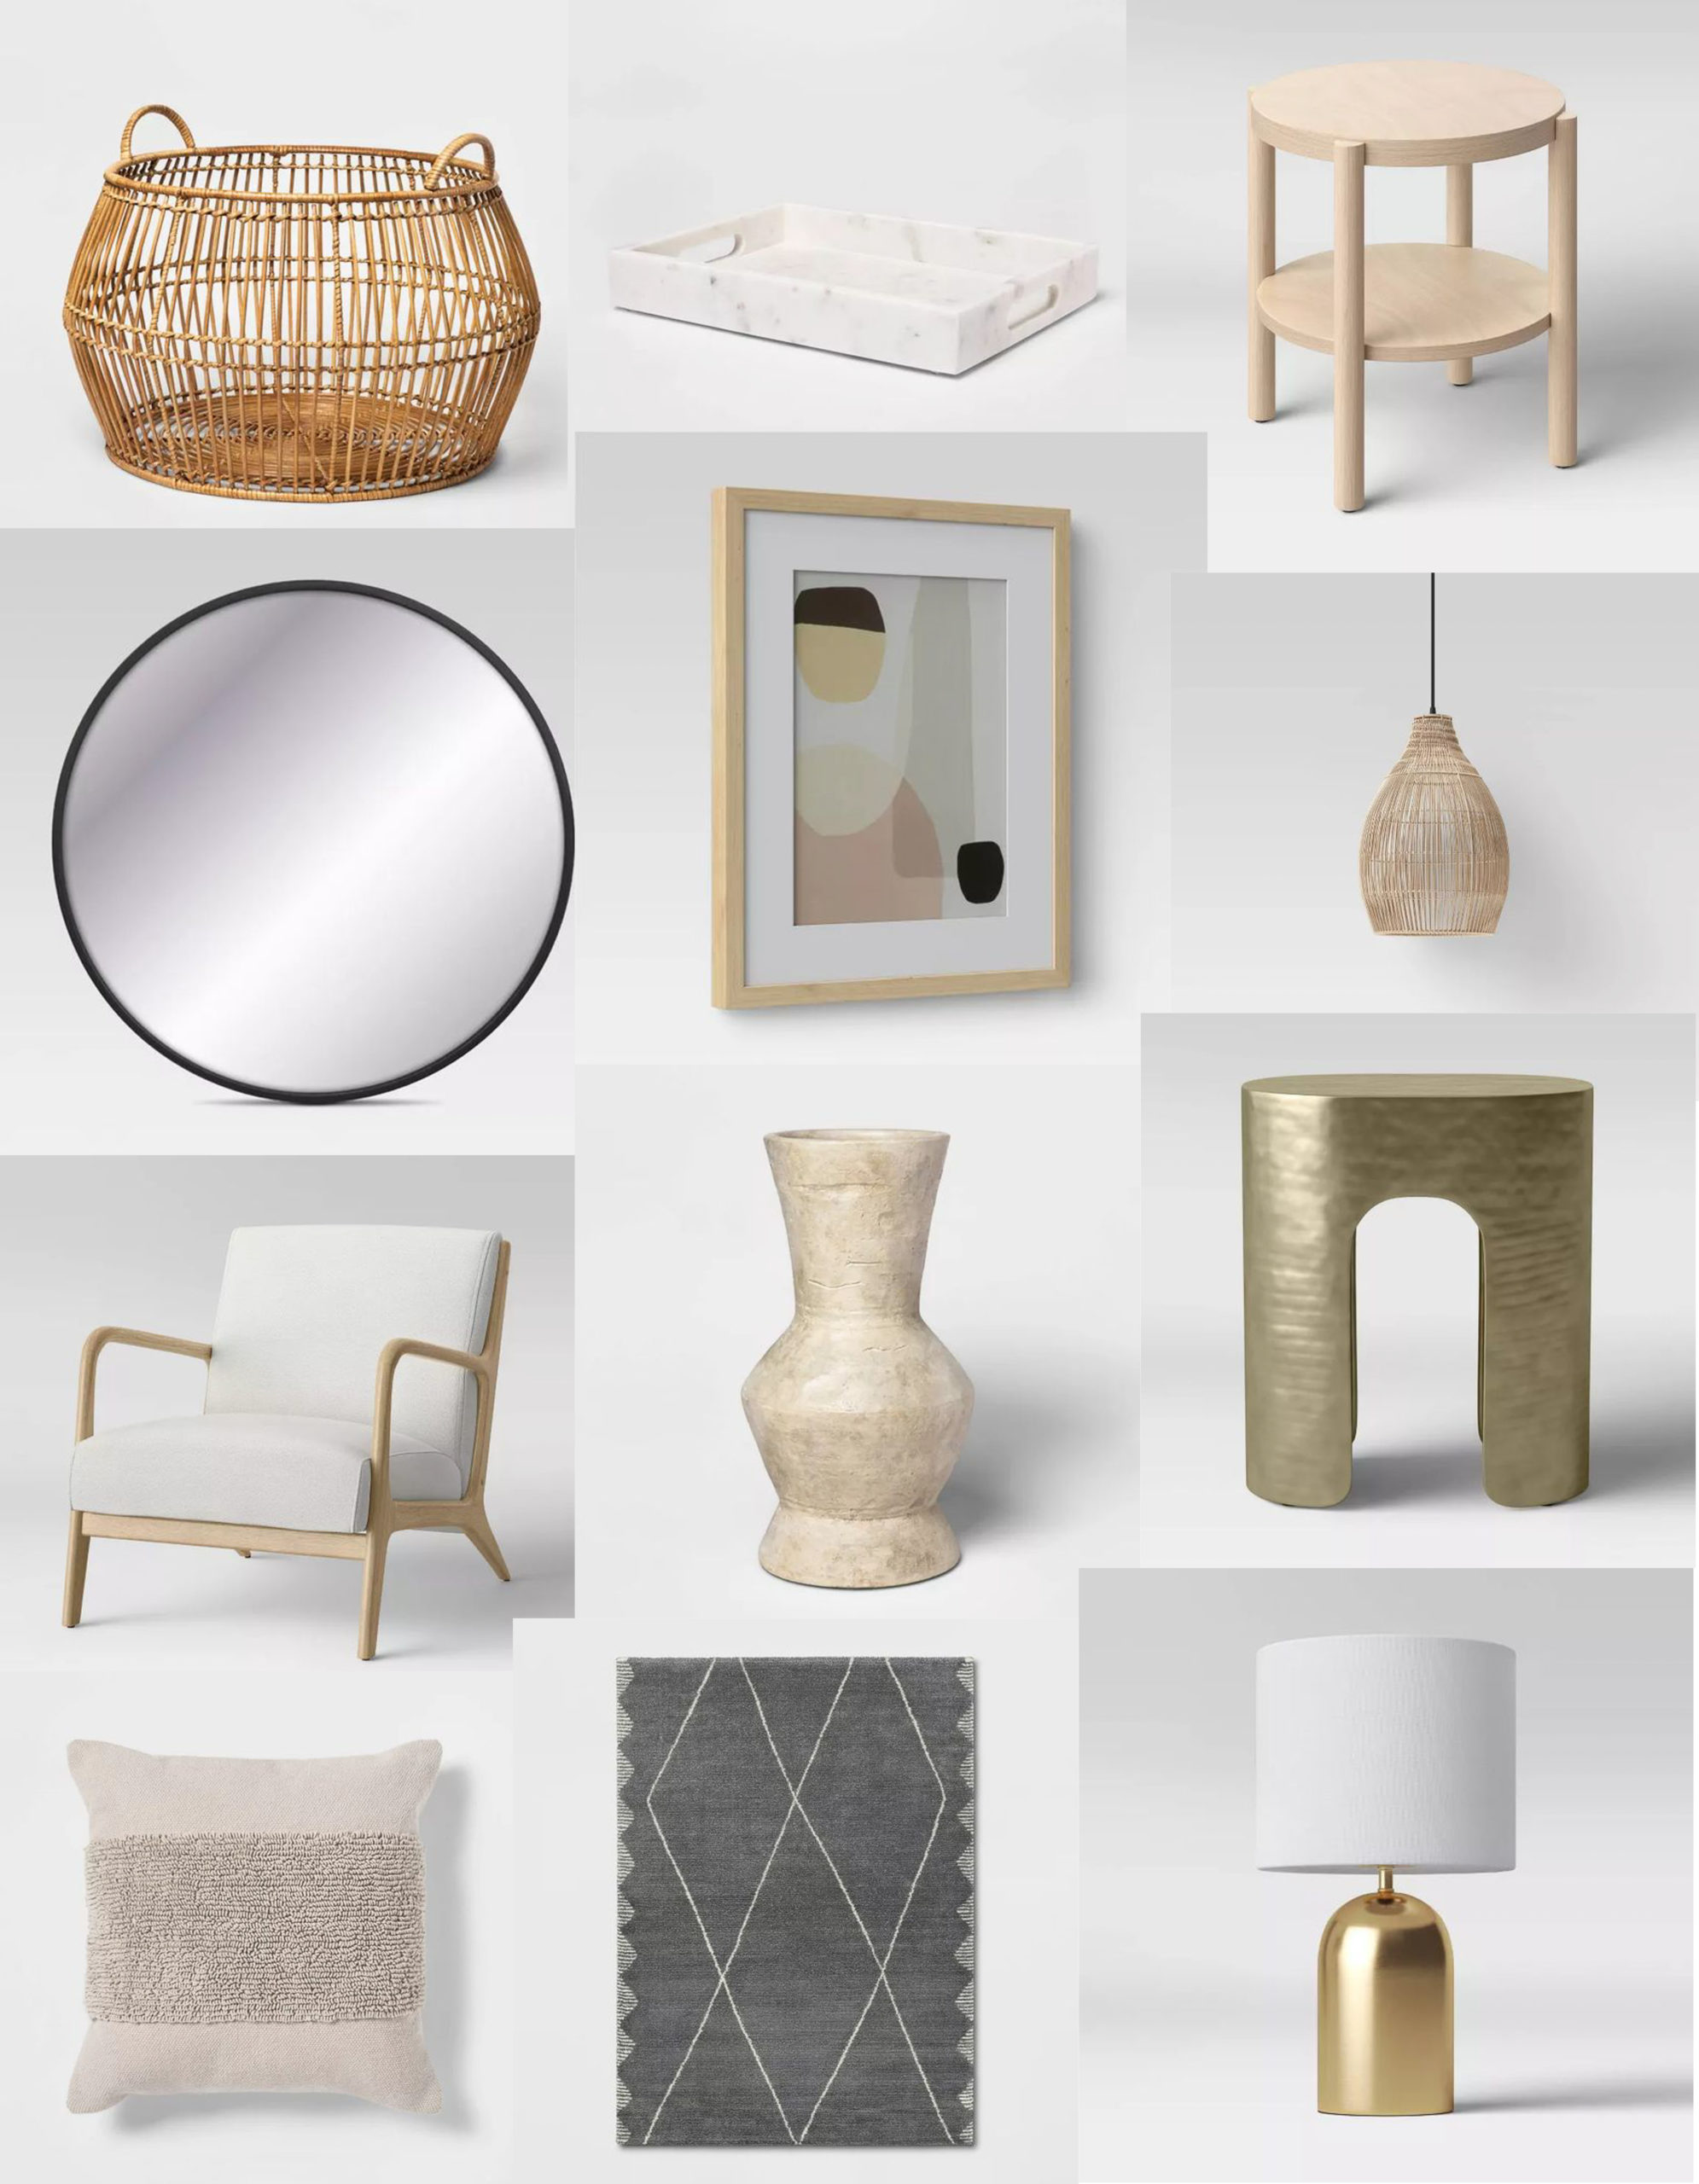 Target Home Decor : Top 9 Home Decor Pieces From Target Family Handyman - We curated three looks for three popular styles with our favorite target pieces from our 3d catalogue.